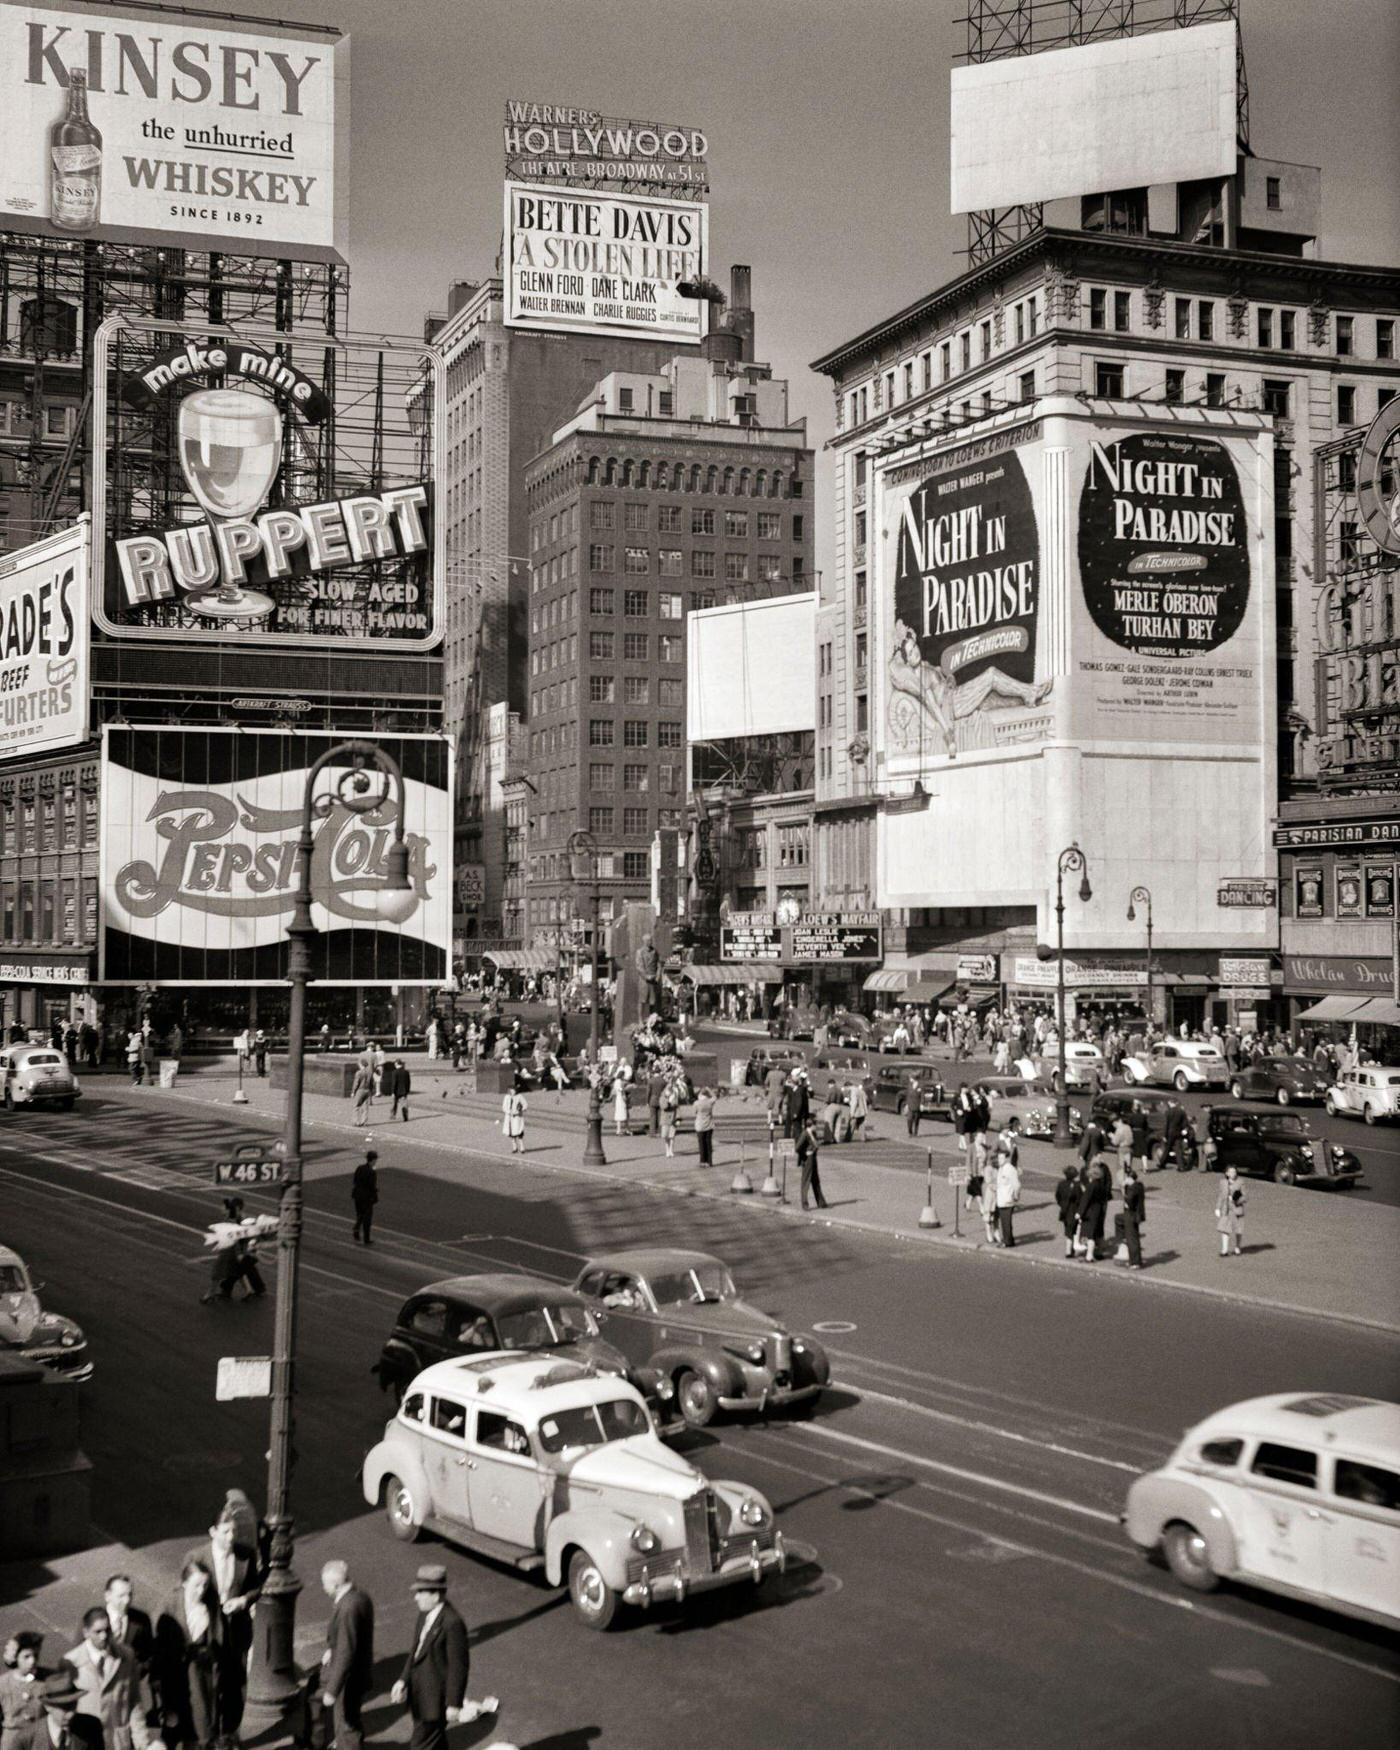 Duffy Square Part Of Times Square, Gaudy Signs For Beverages And Movies Confront Pedestrians, Cars, And Taxis, Manhattan, 1930S